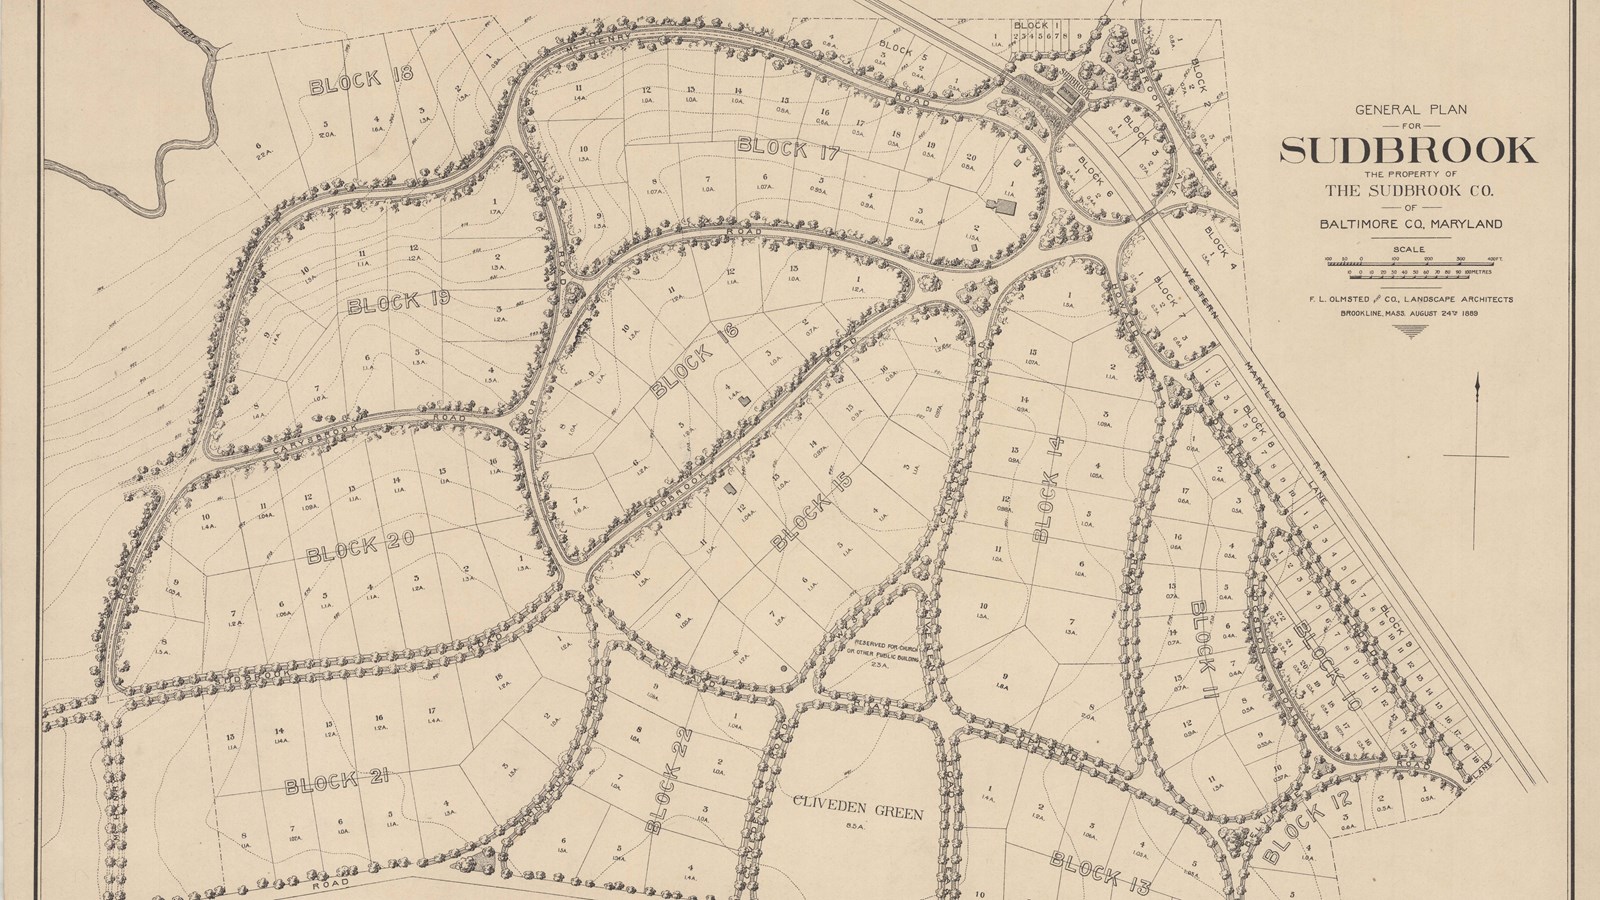 Plan of community with tree lined curving roads, lots for homes in between